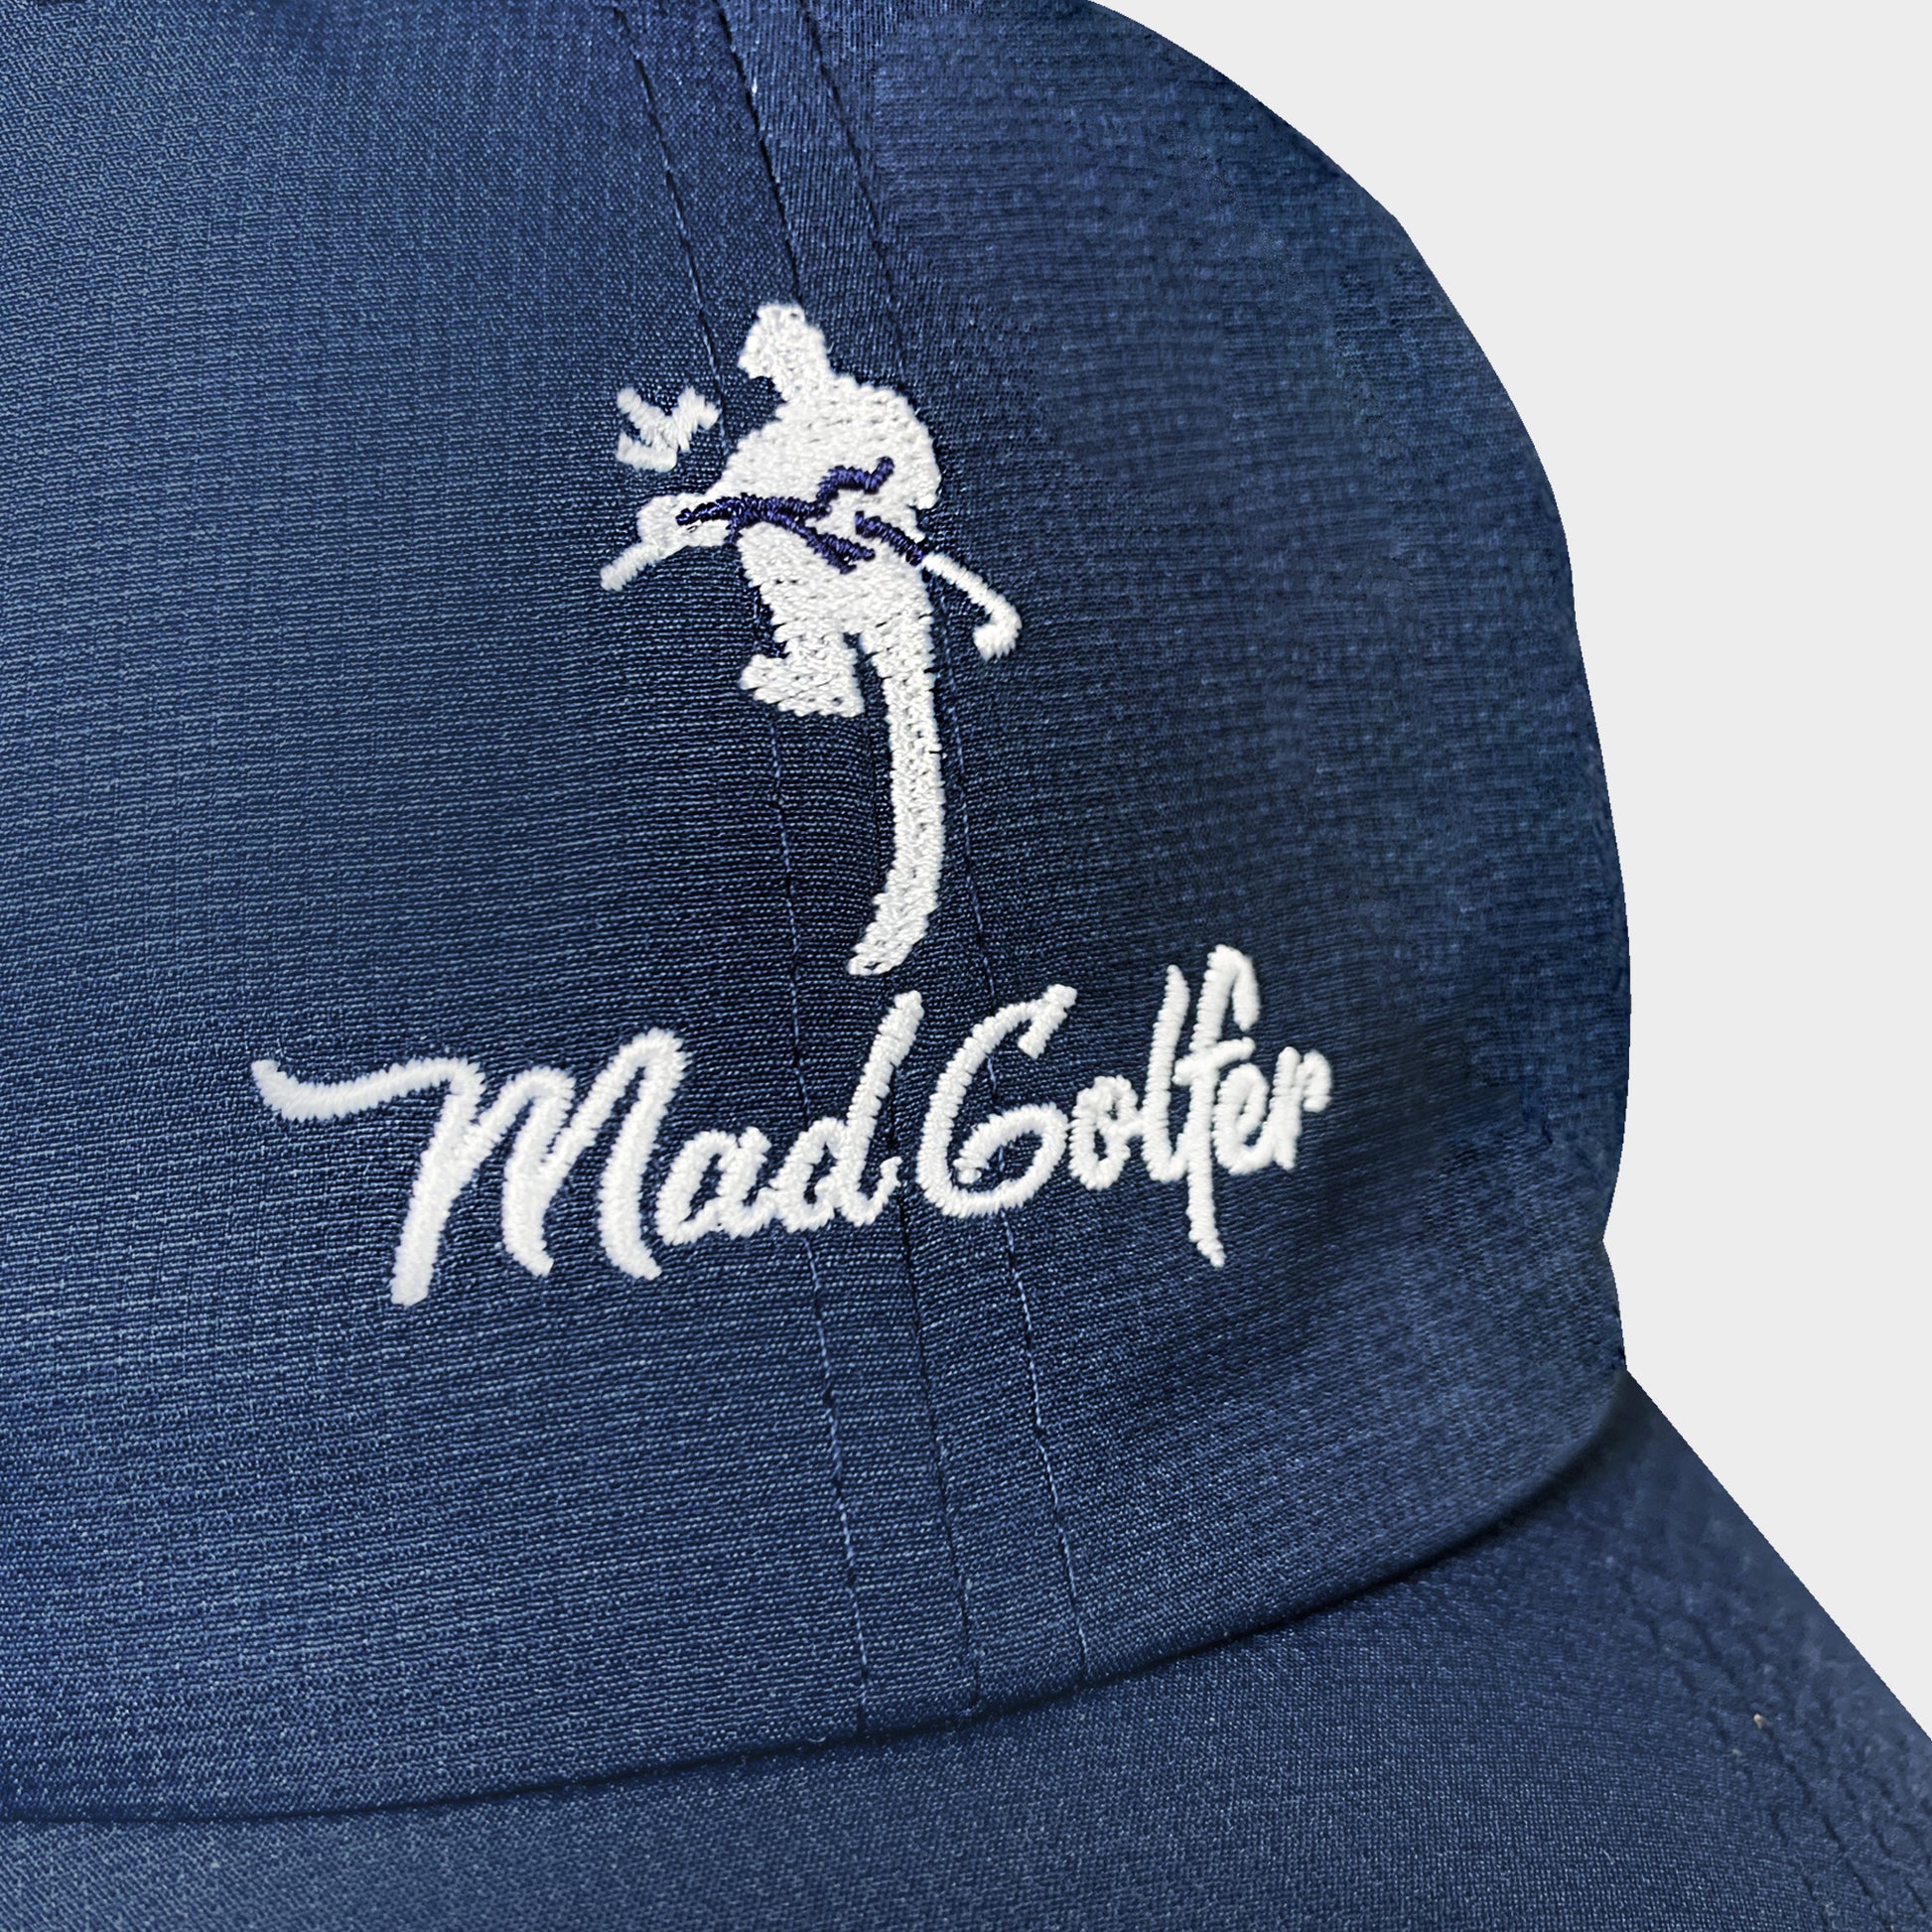 navy blue MadGolfer baseball hat with classic old-school design and logo close-up